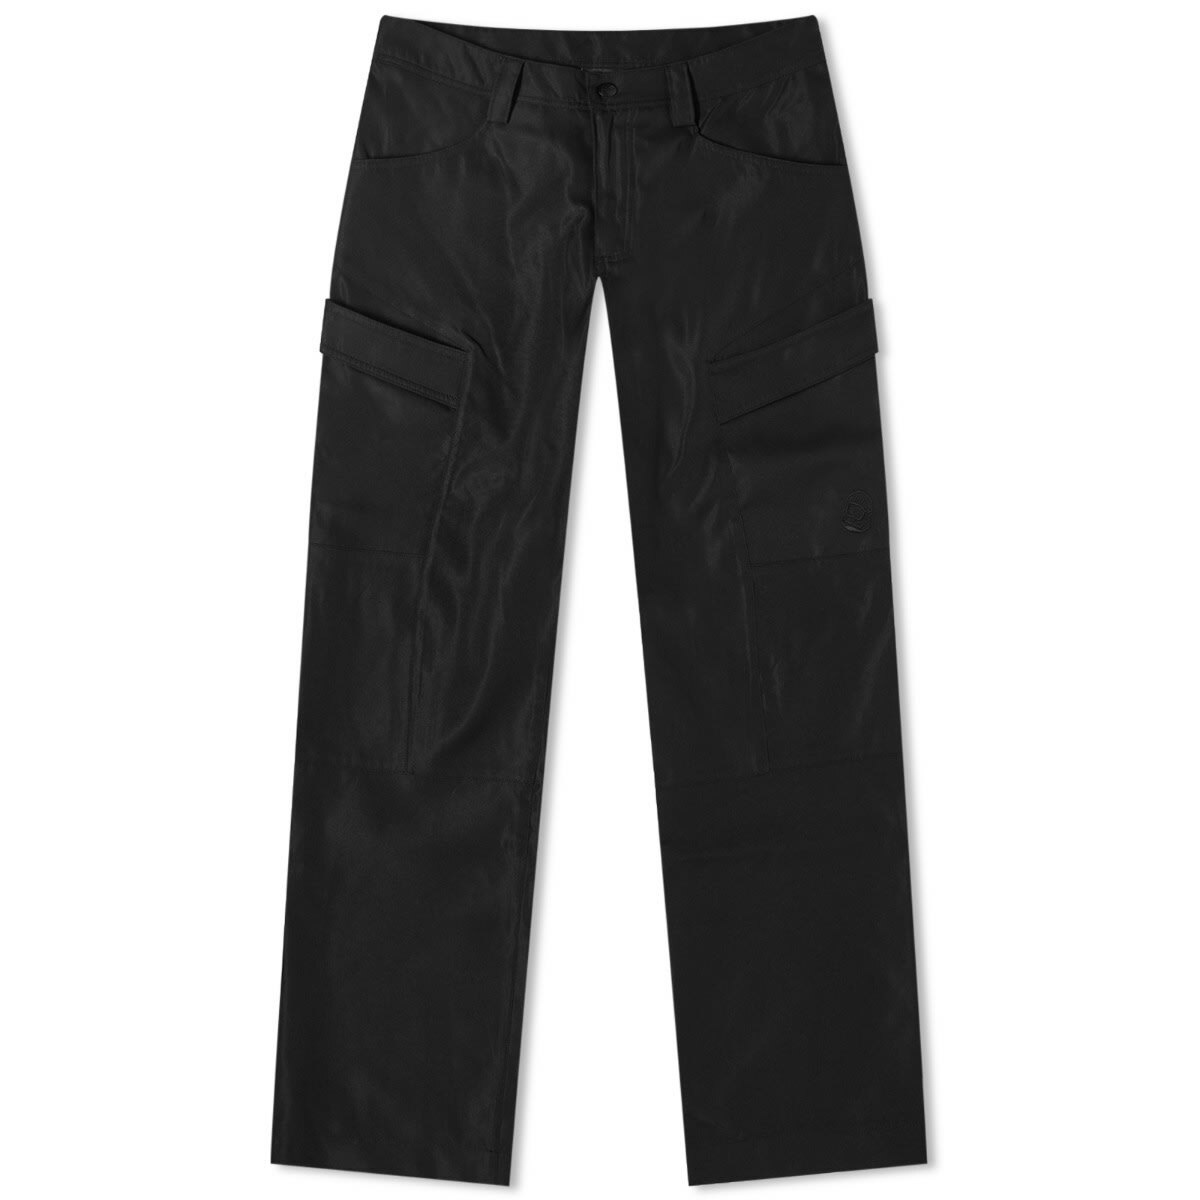 Hiking Pants] - Mens - The North Face (Utility Brown | Zip-Off | Paramount  Pro Convertible) | Kit Lender - Simple Ski and Snowboard Clothing Rentals  for Your Next Trip